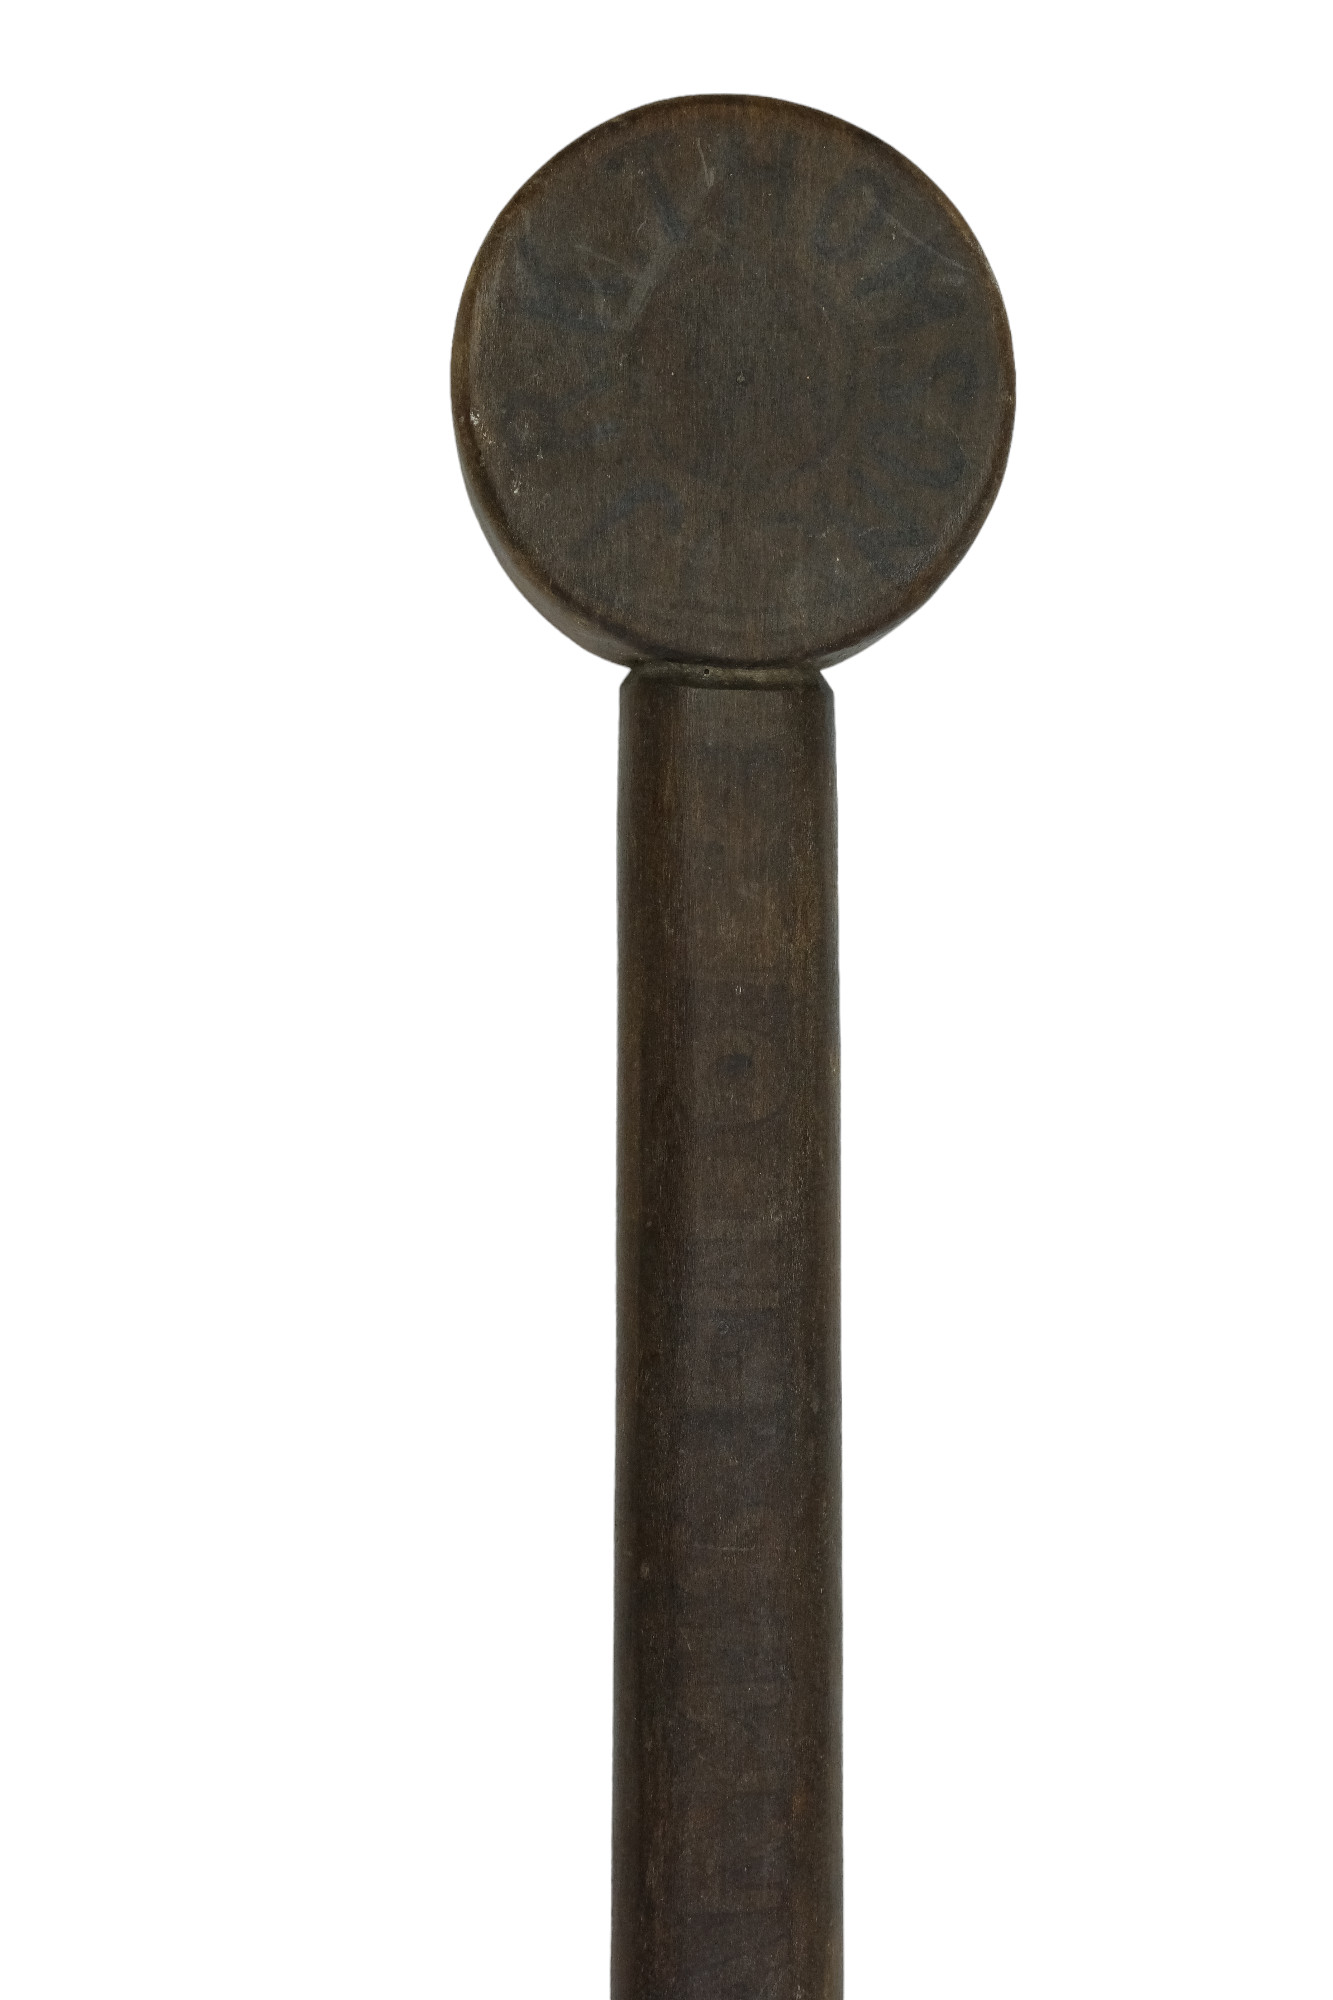 A King William's College [Isle of man] Rifle Club ceremonial or prize wooden spoon or paddle, - Image 2 of 2